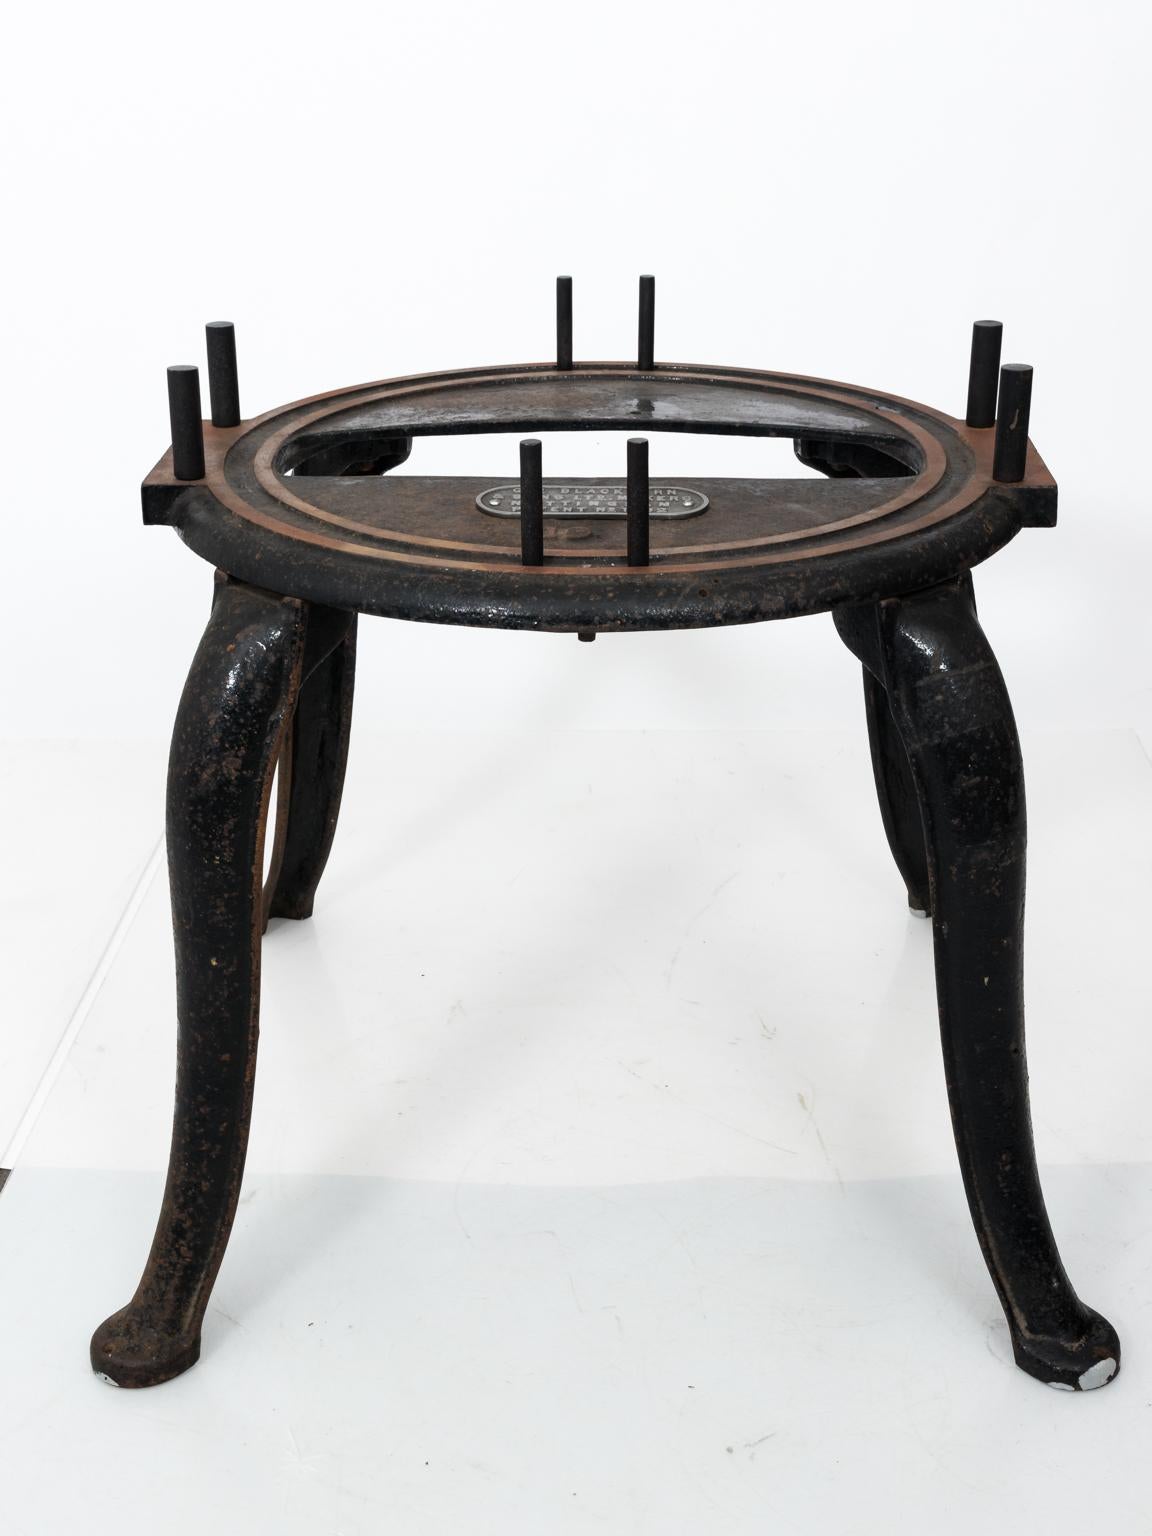 Iron base center table with new glass top made from a reclaimed Industrial piece from Nottingham, England, circa 20th century. The base has a plaque that reads 